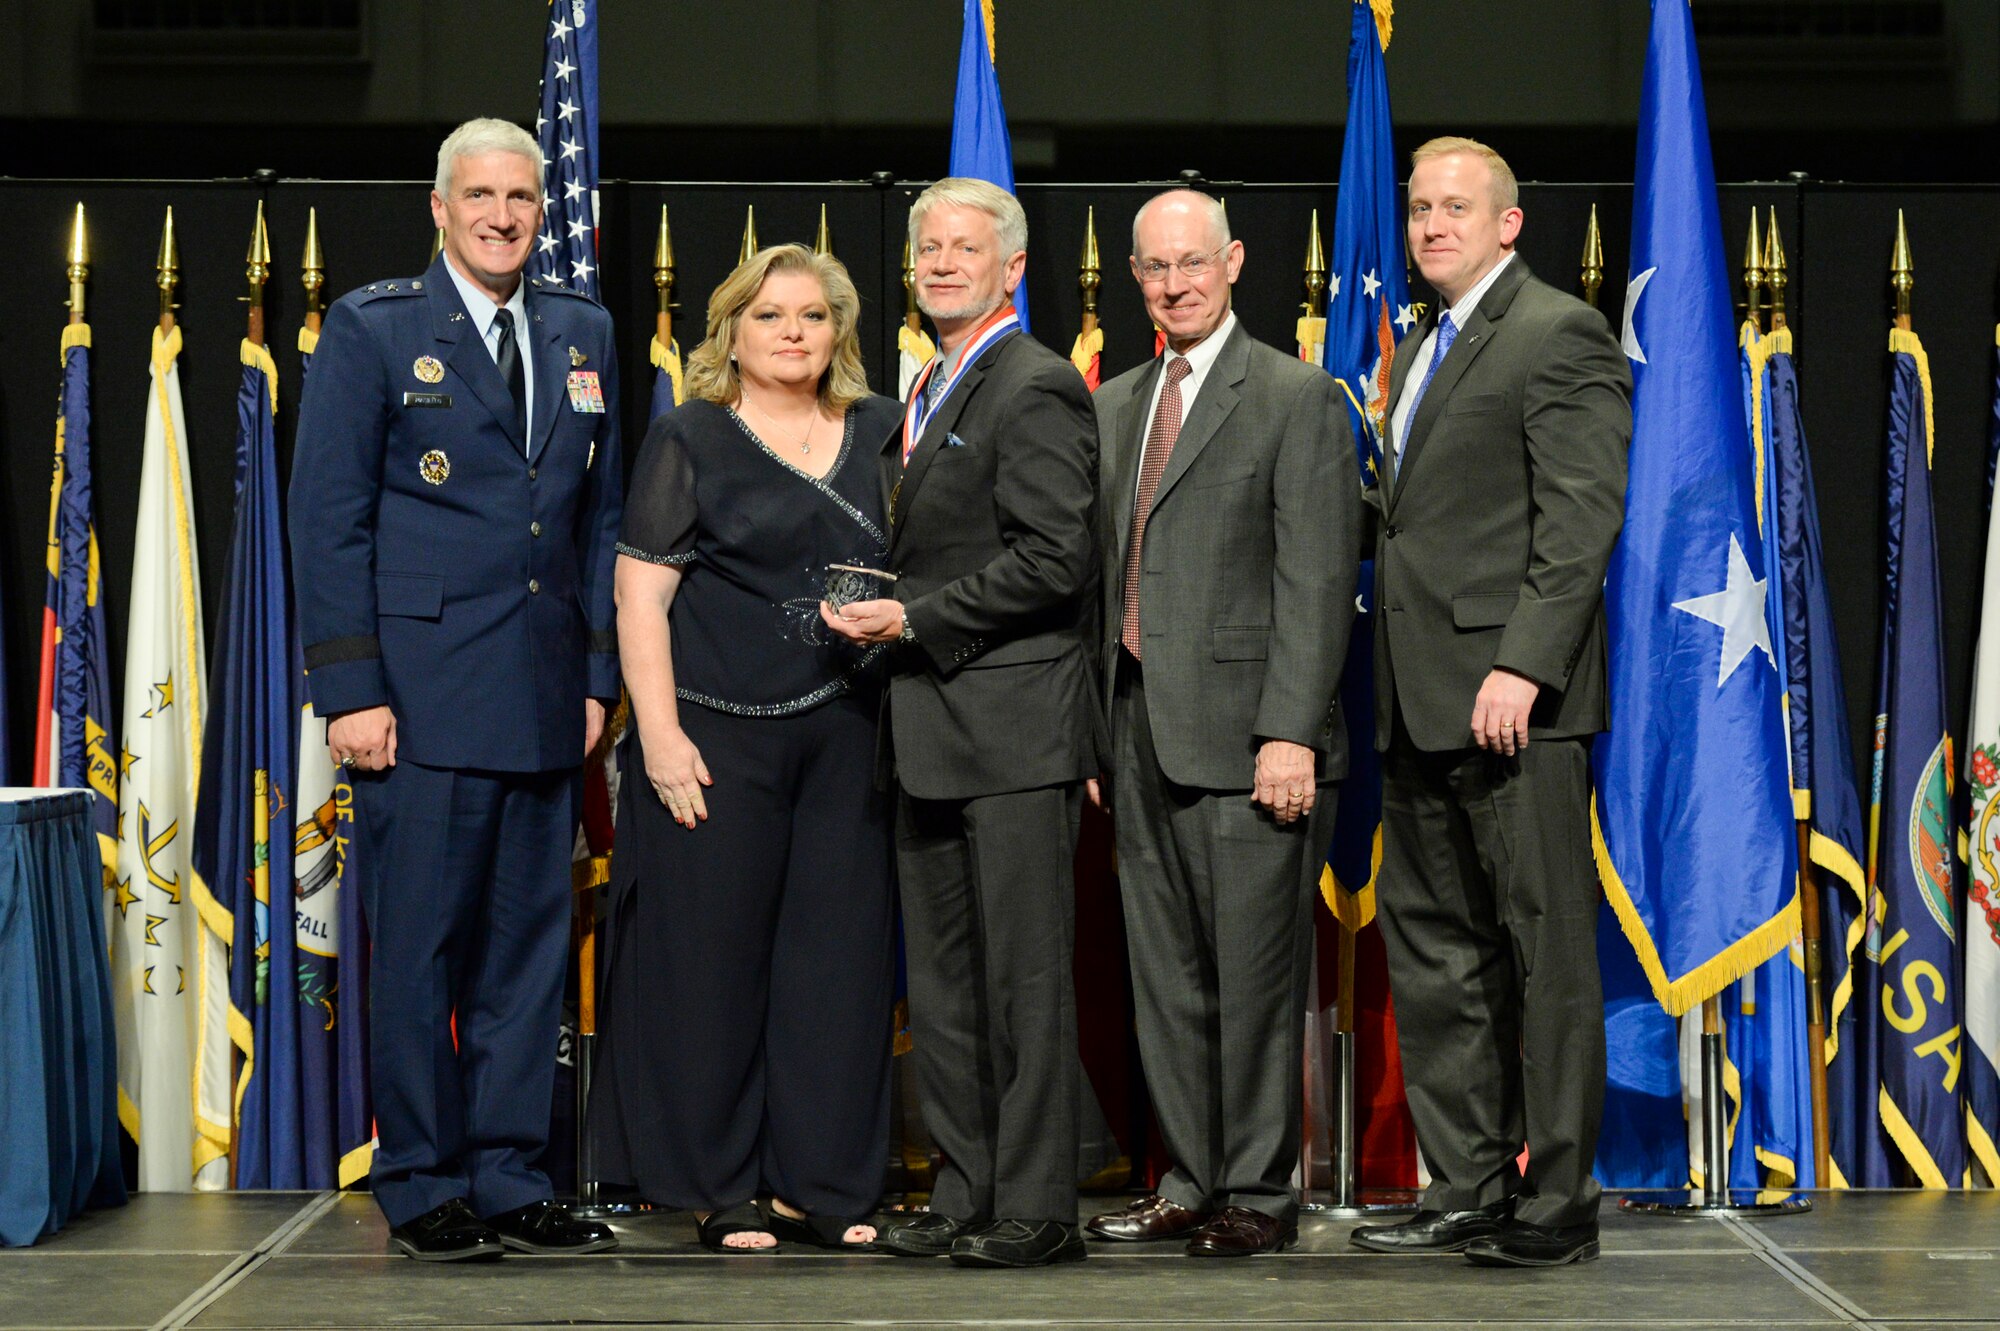 Dr. Alan Ohrt, principal mechanical engineer, Air Force Research Laboratory Munitions Directorate, and his wife Emma, are honored during the 2014 AFRL Fellows and Early Career Awards Banquet Oct. 30 at the National Museum of the U.S. Air Force.  Joining them are Maj. Gen. Tom Masiello, AFRL commander, retired Maj. Gen. Dick Paul, AFRL's first commander, and Dr. Morley Stone, AFRL chief technology officer.  (U.S. Air Force photo/Wesley Farnsworth)